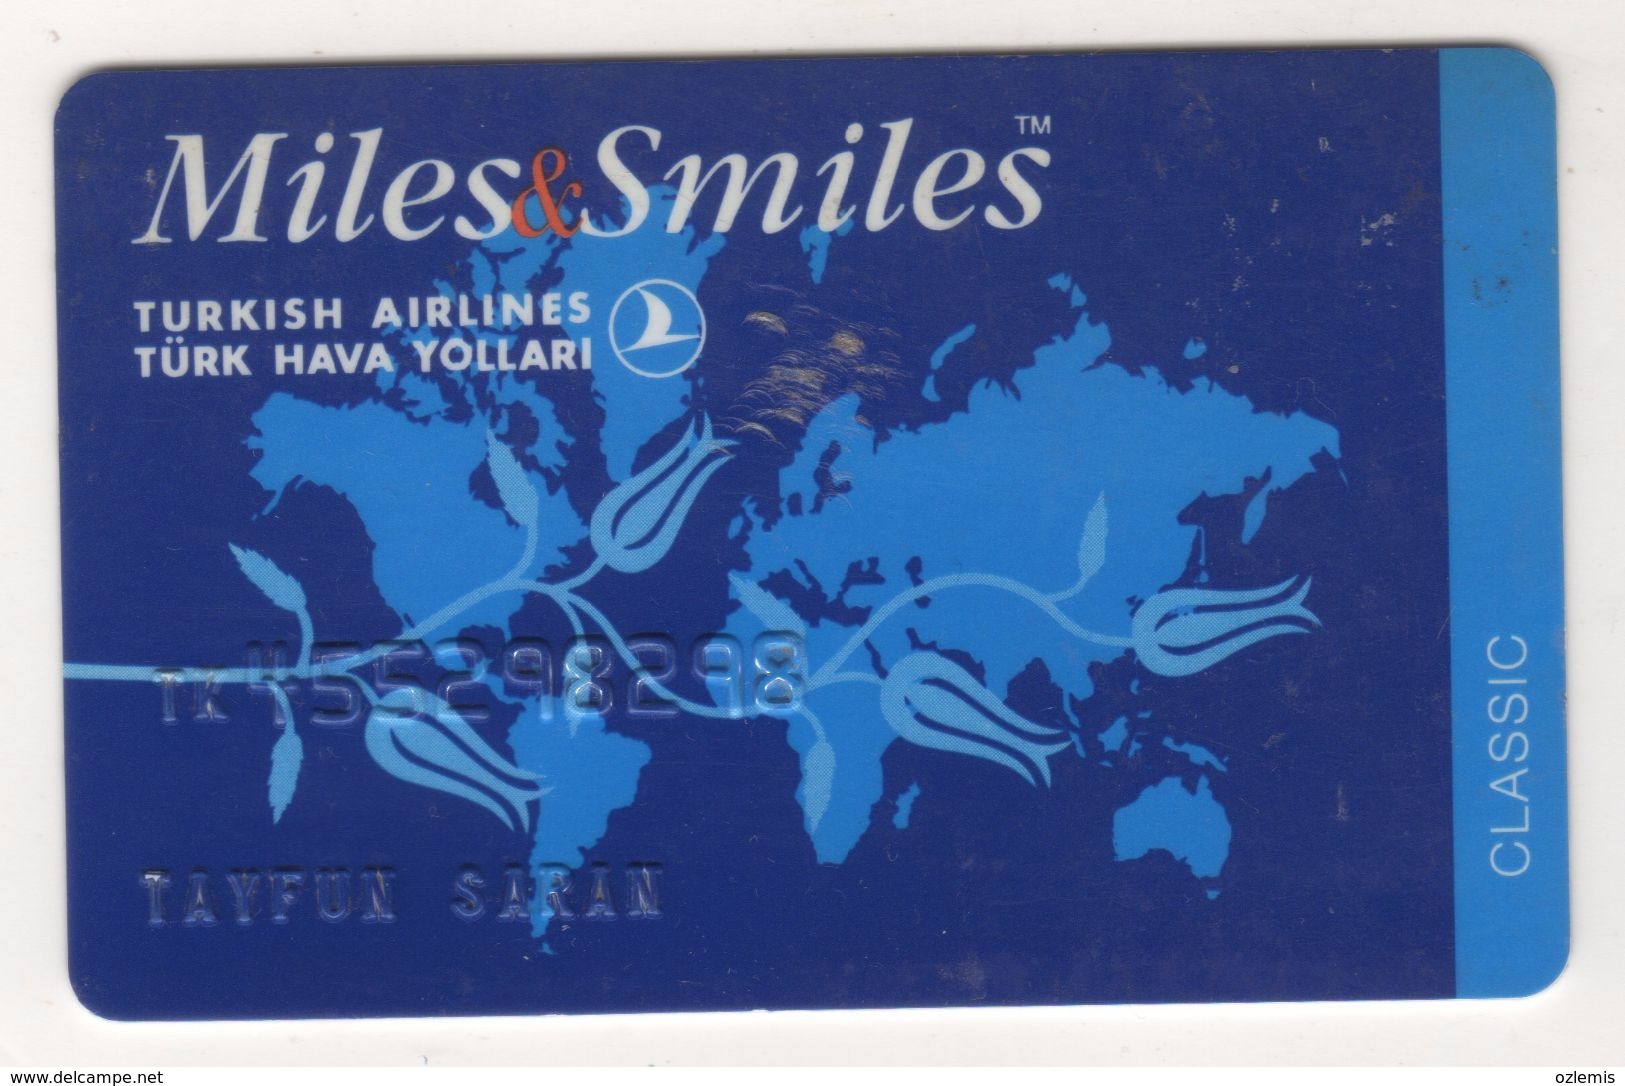 TURKISH AIRLINES MILES&SMILES CLASSIC  CARD (USED) - Gift Cards